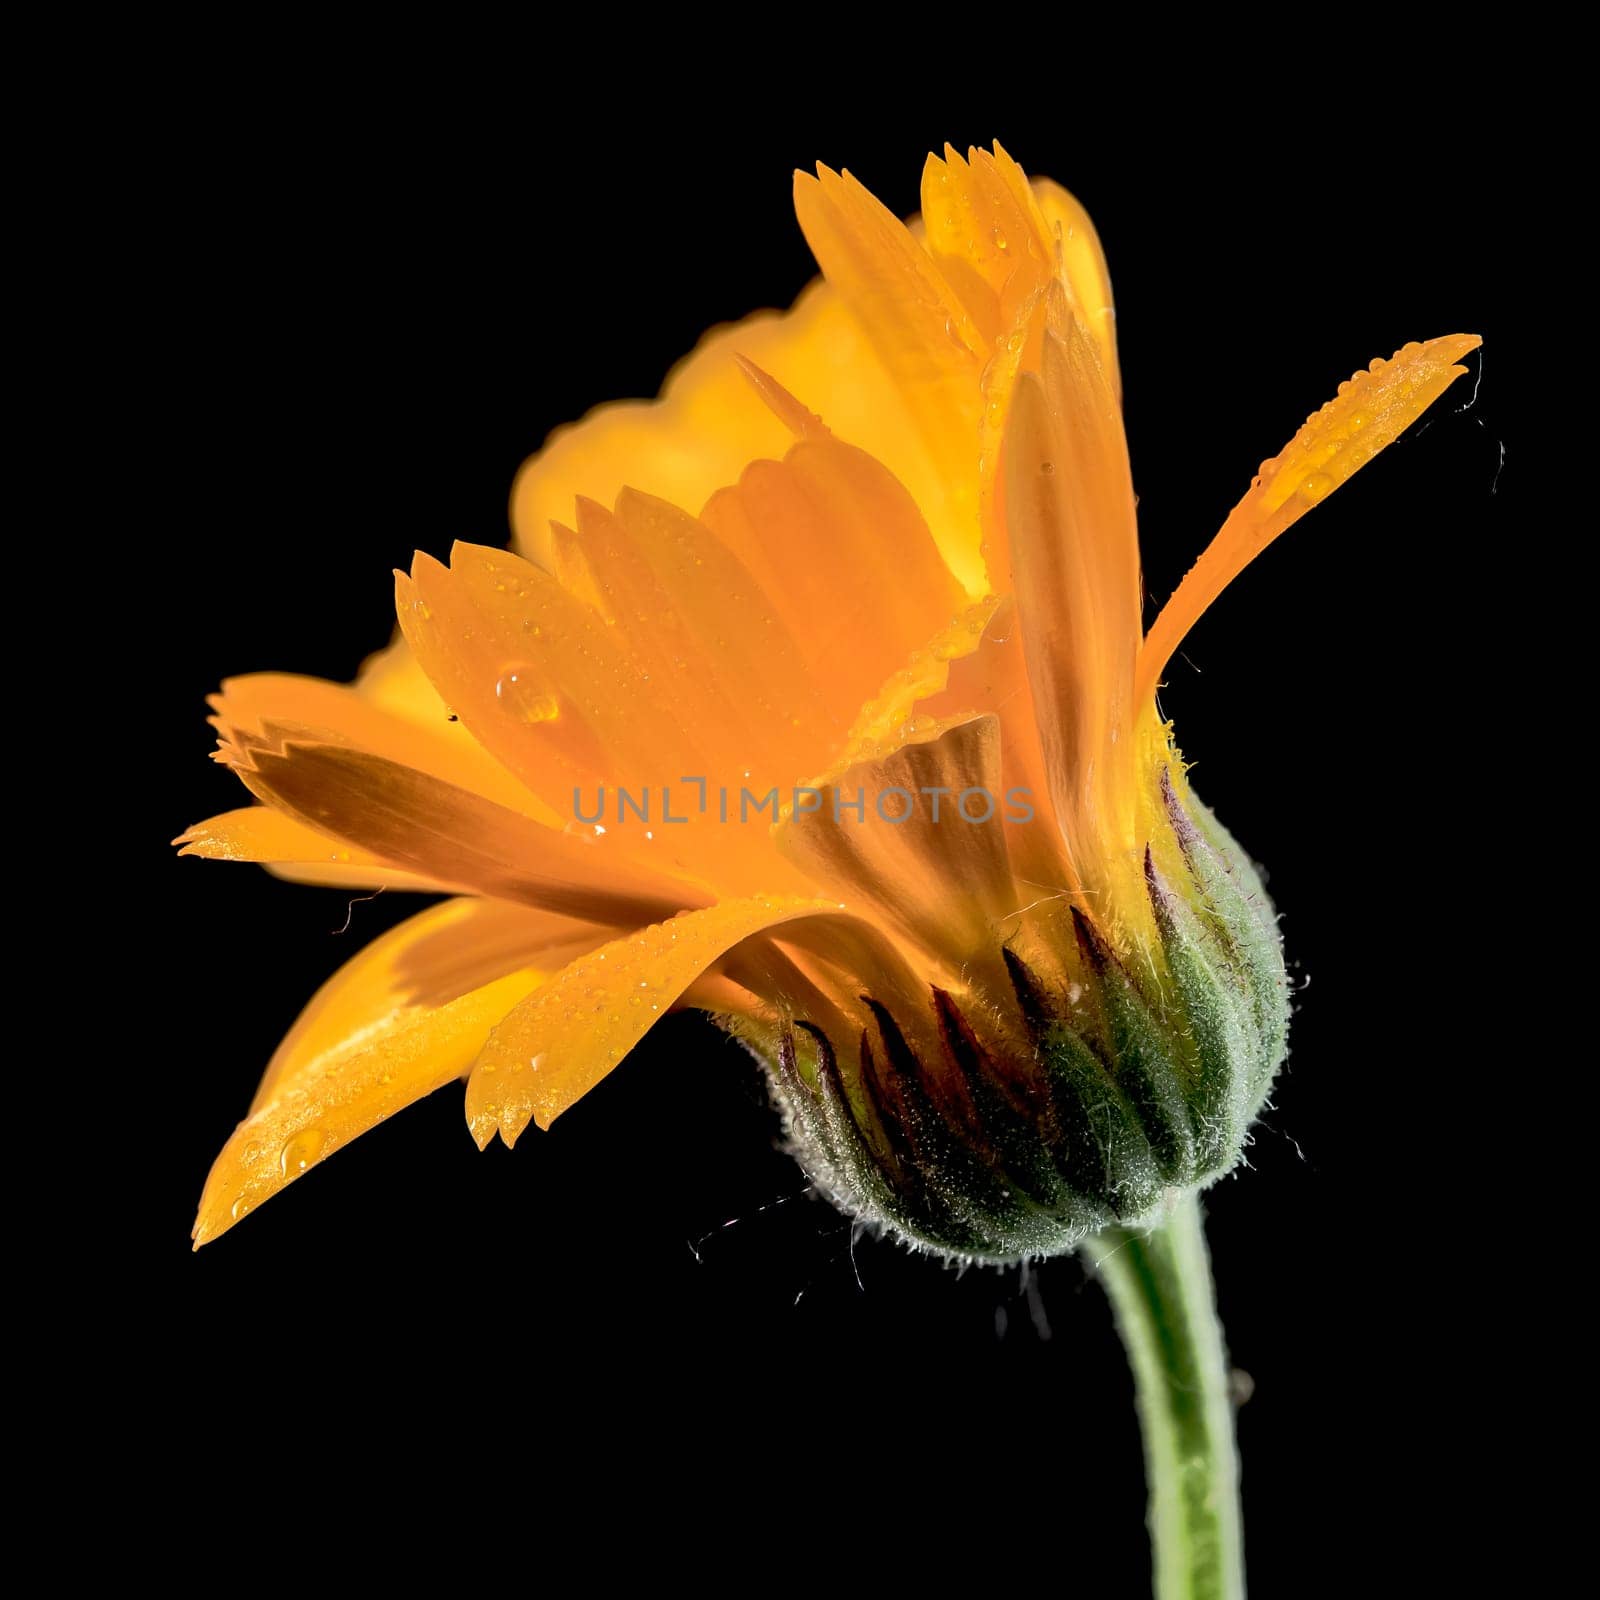 Beautiful Blooming Calendula officinalis flowers on a black background. Flower head close-up.